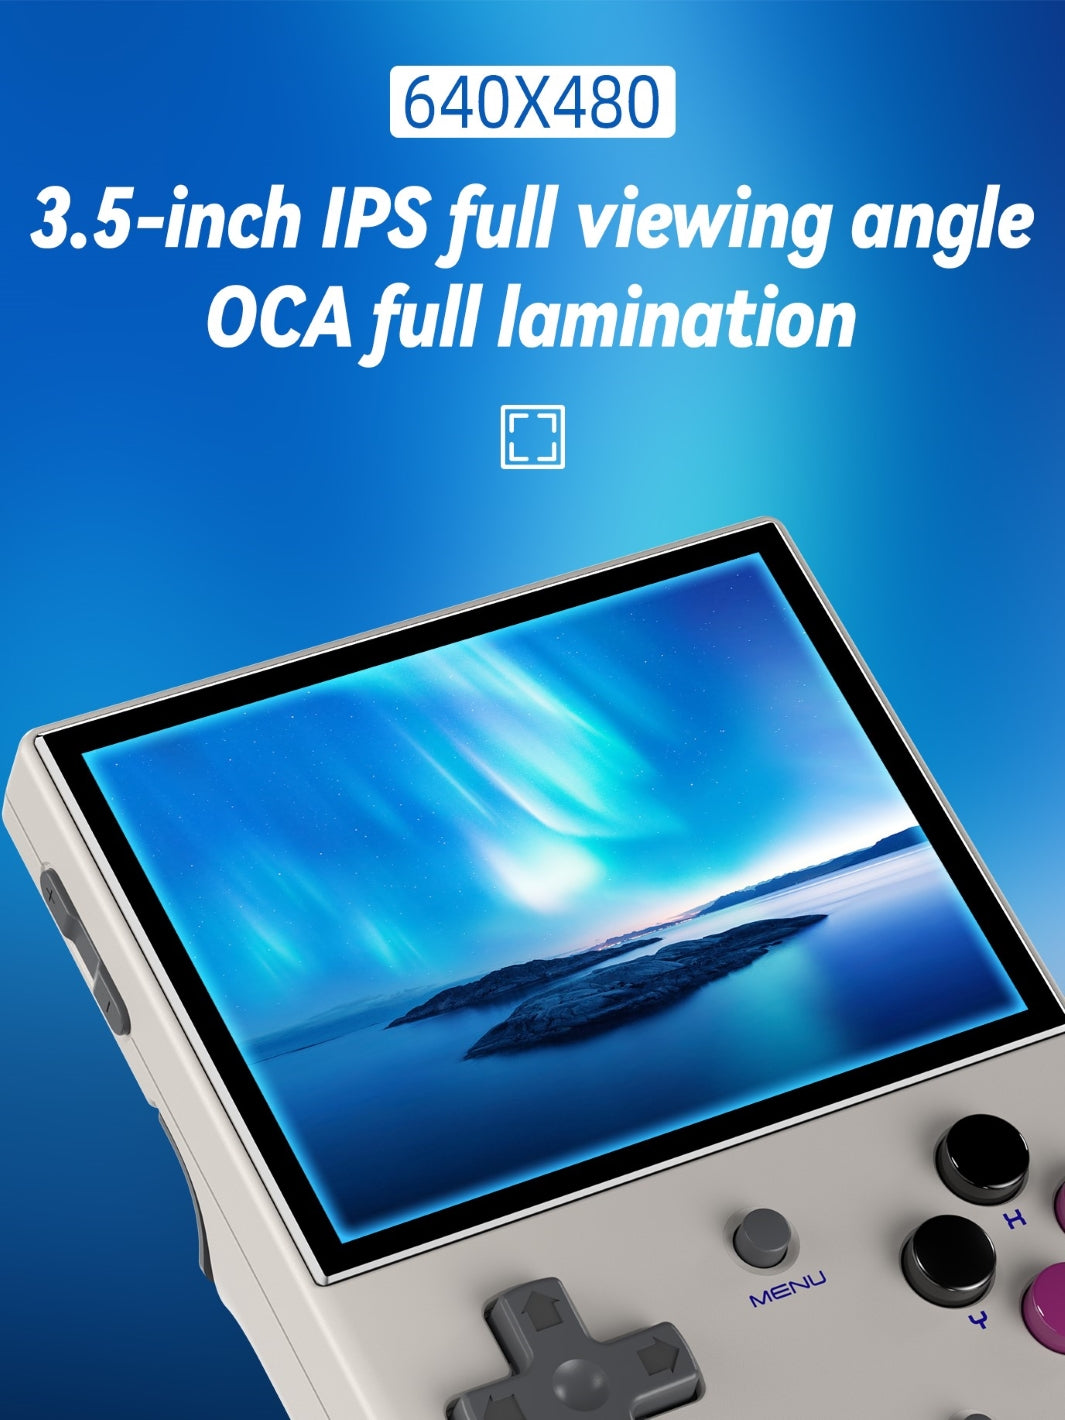 Anbernic RG35XX plus with its 3.5-inch Full viewing angle IPS Display, with an impressive 640*480 resolution.